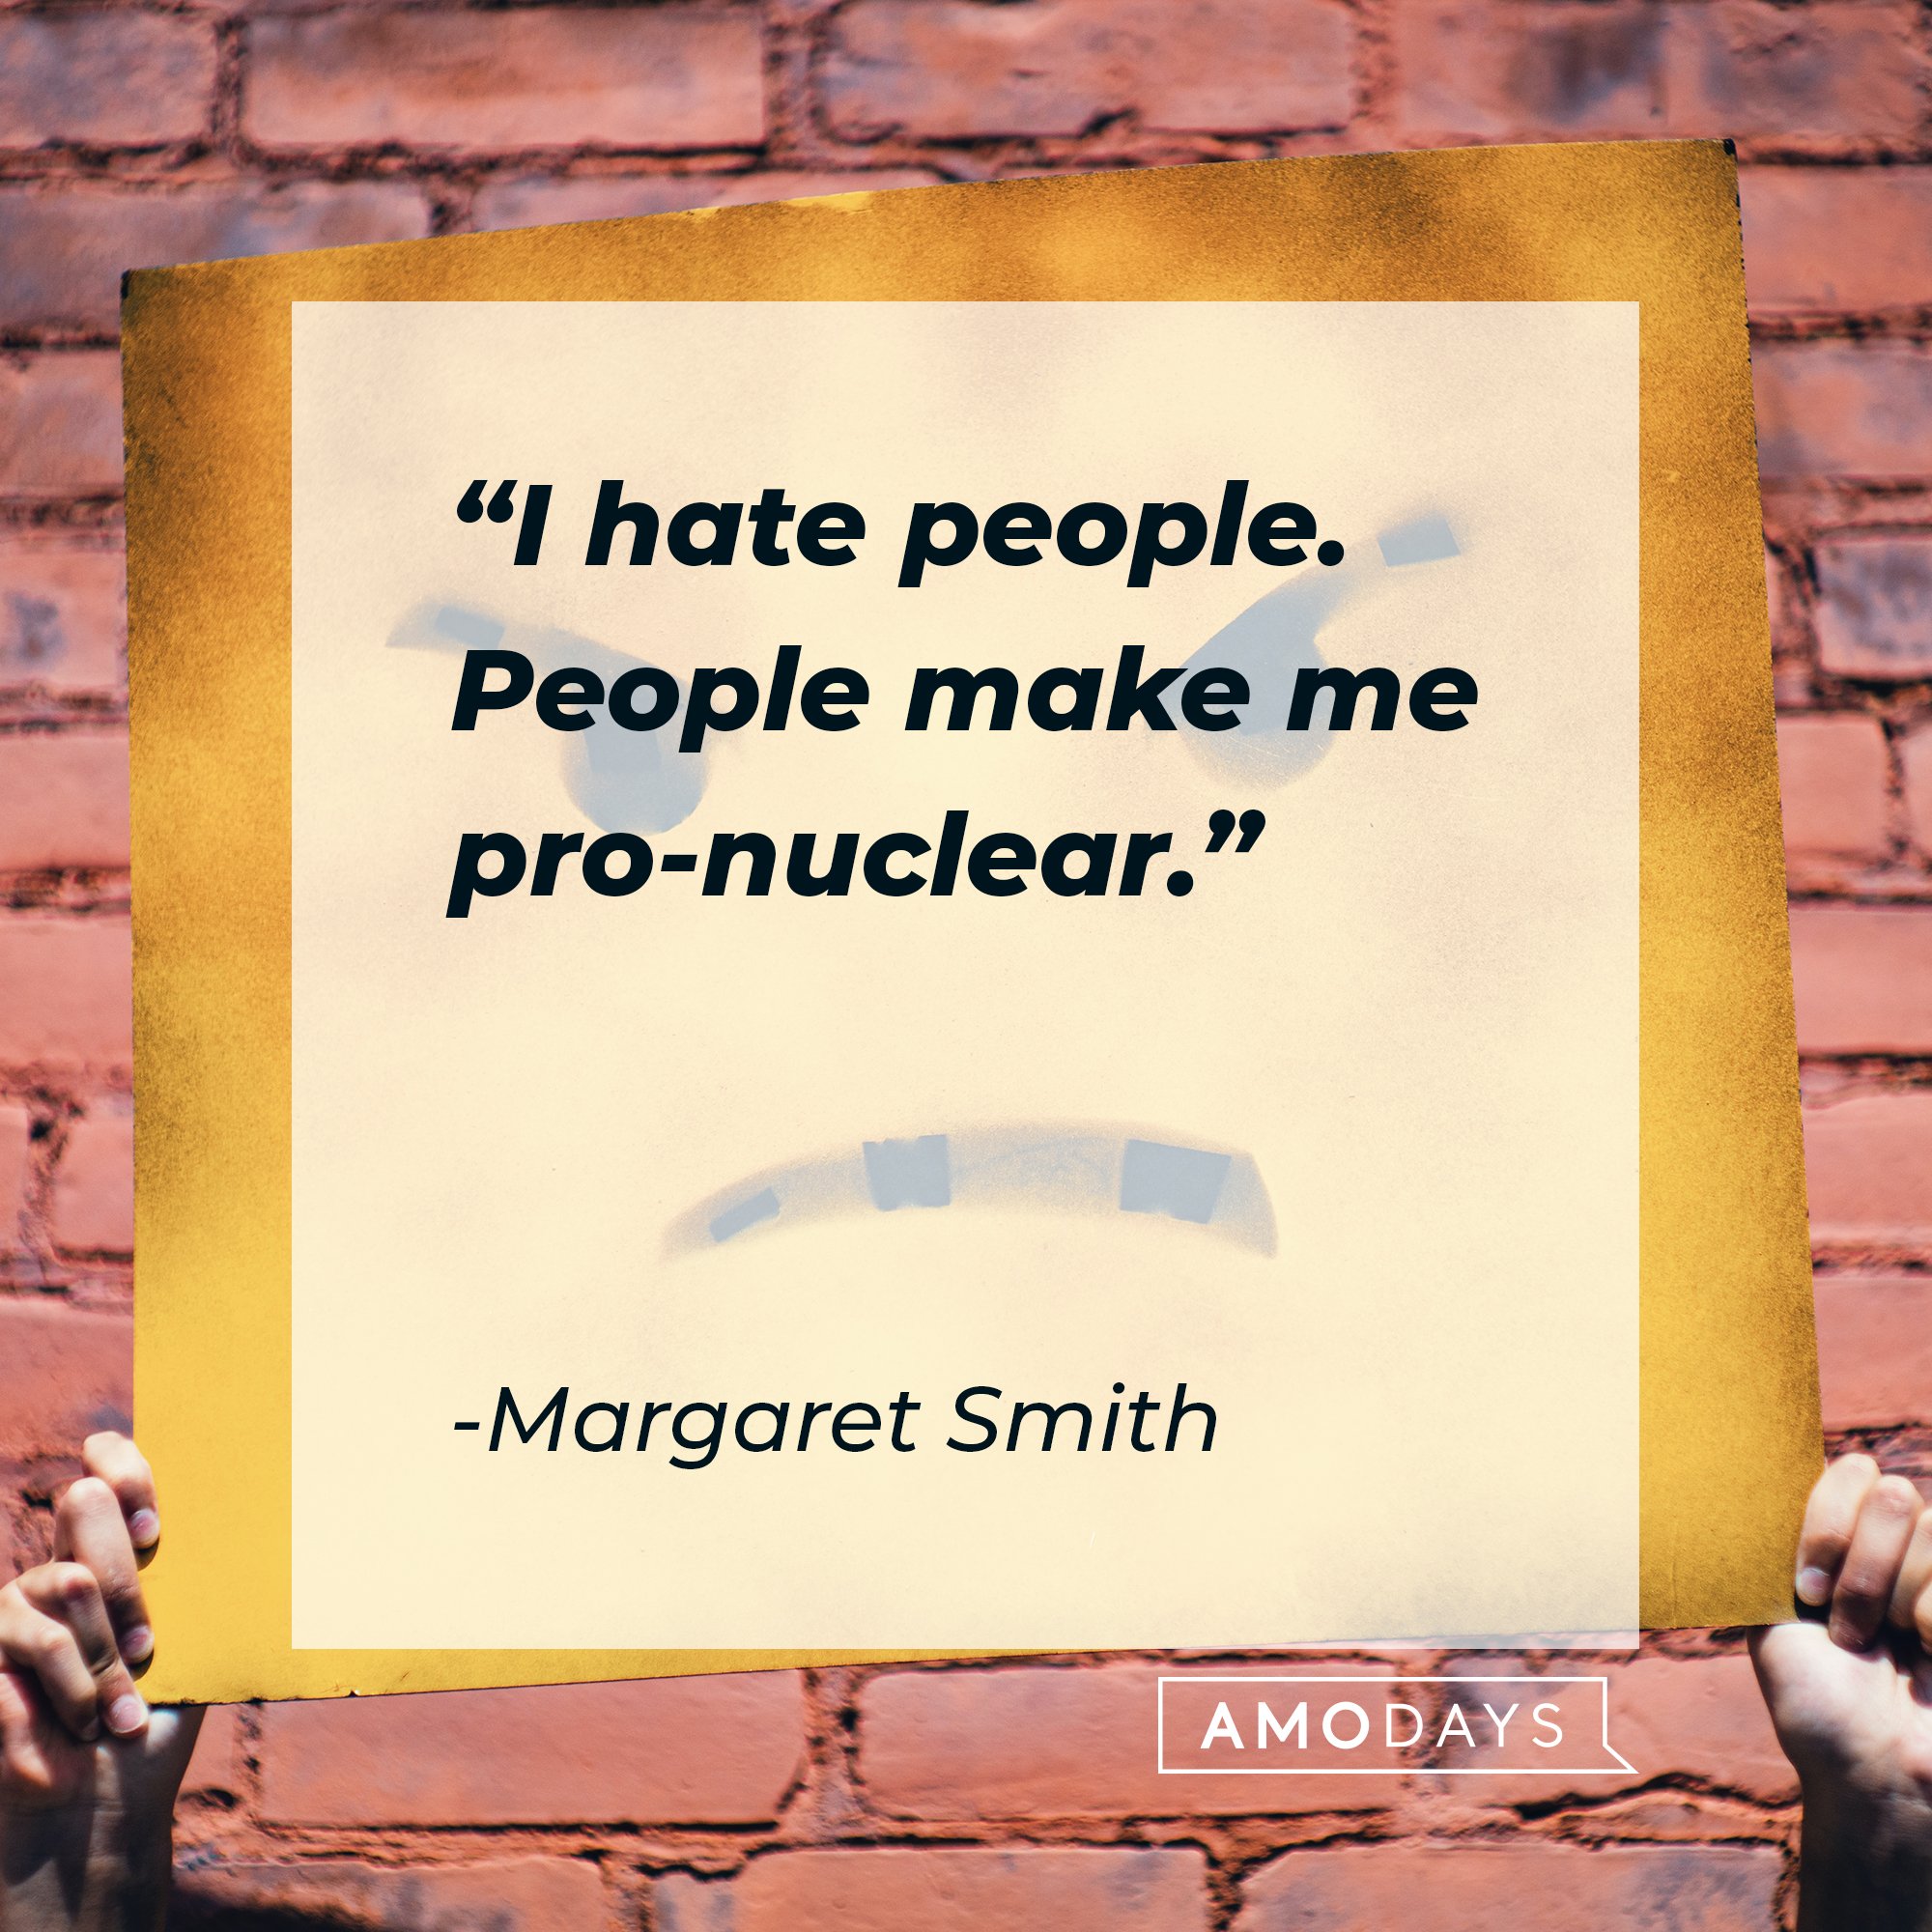 Margaret Smith’s quote: "I hate people. People make me pro-nuclear." | Image: AmoDays